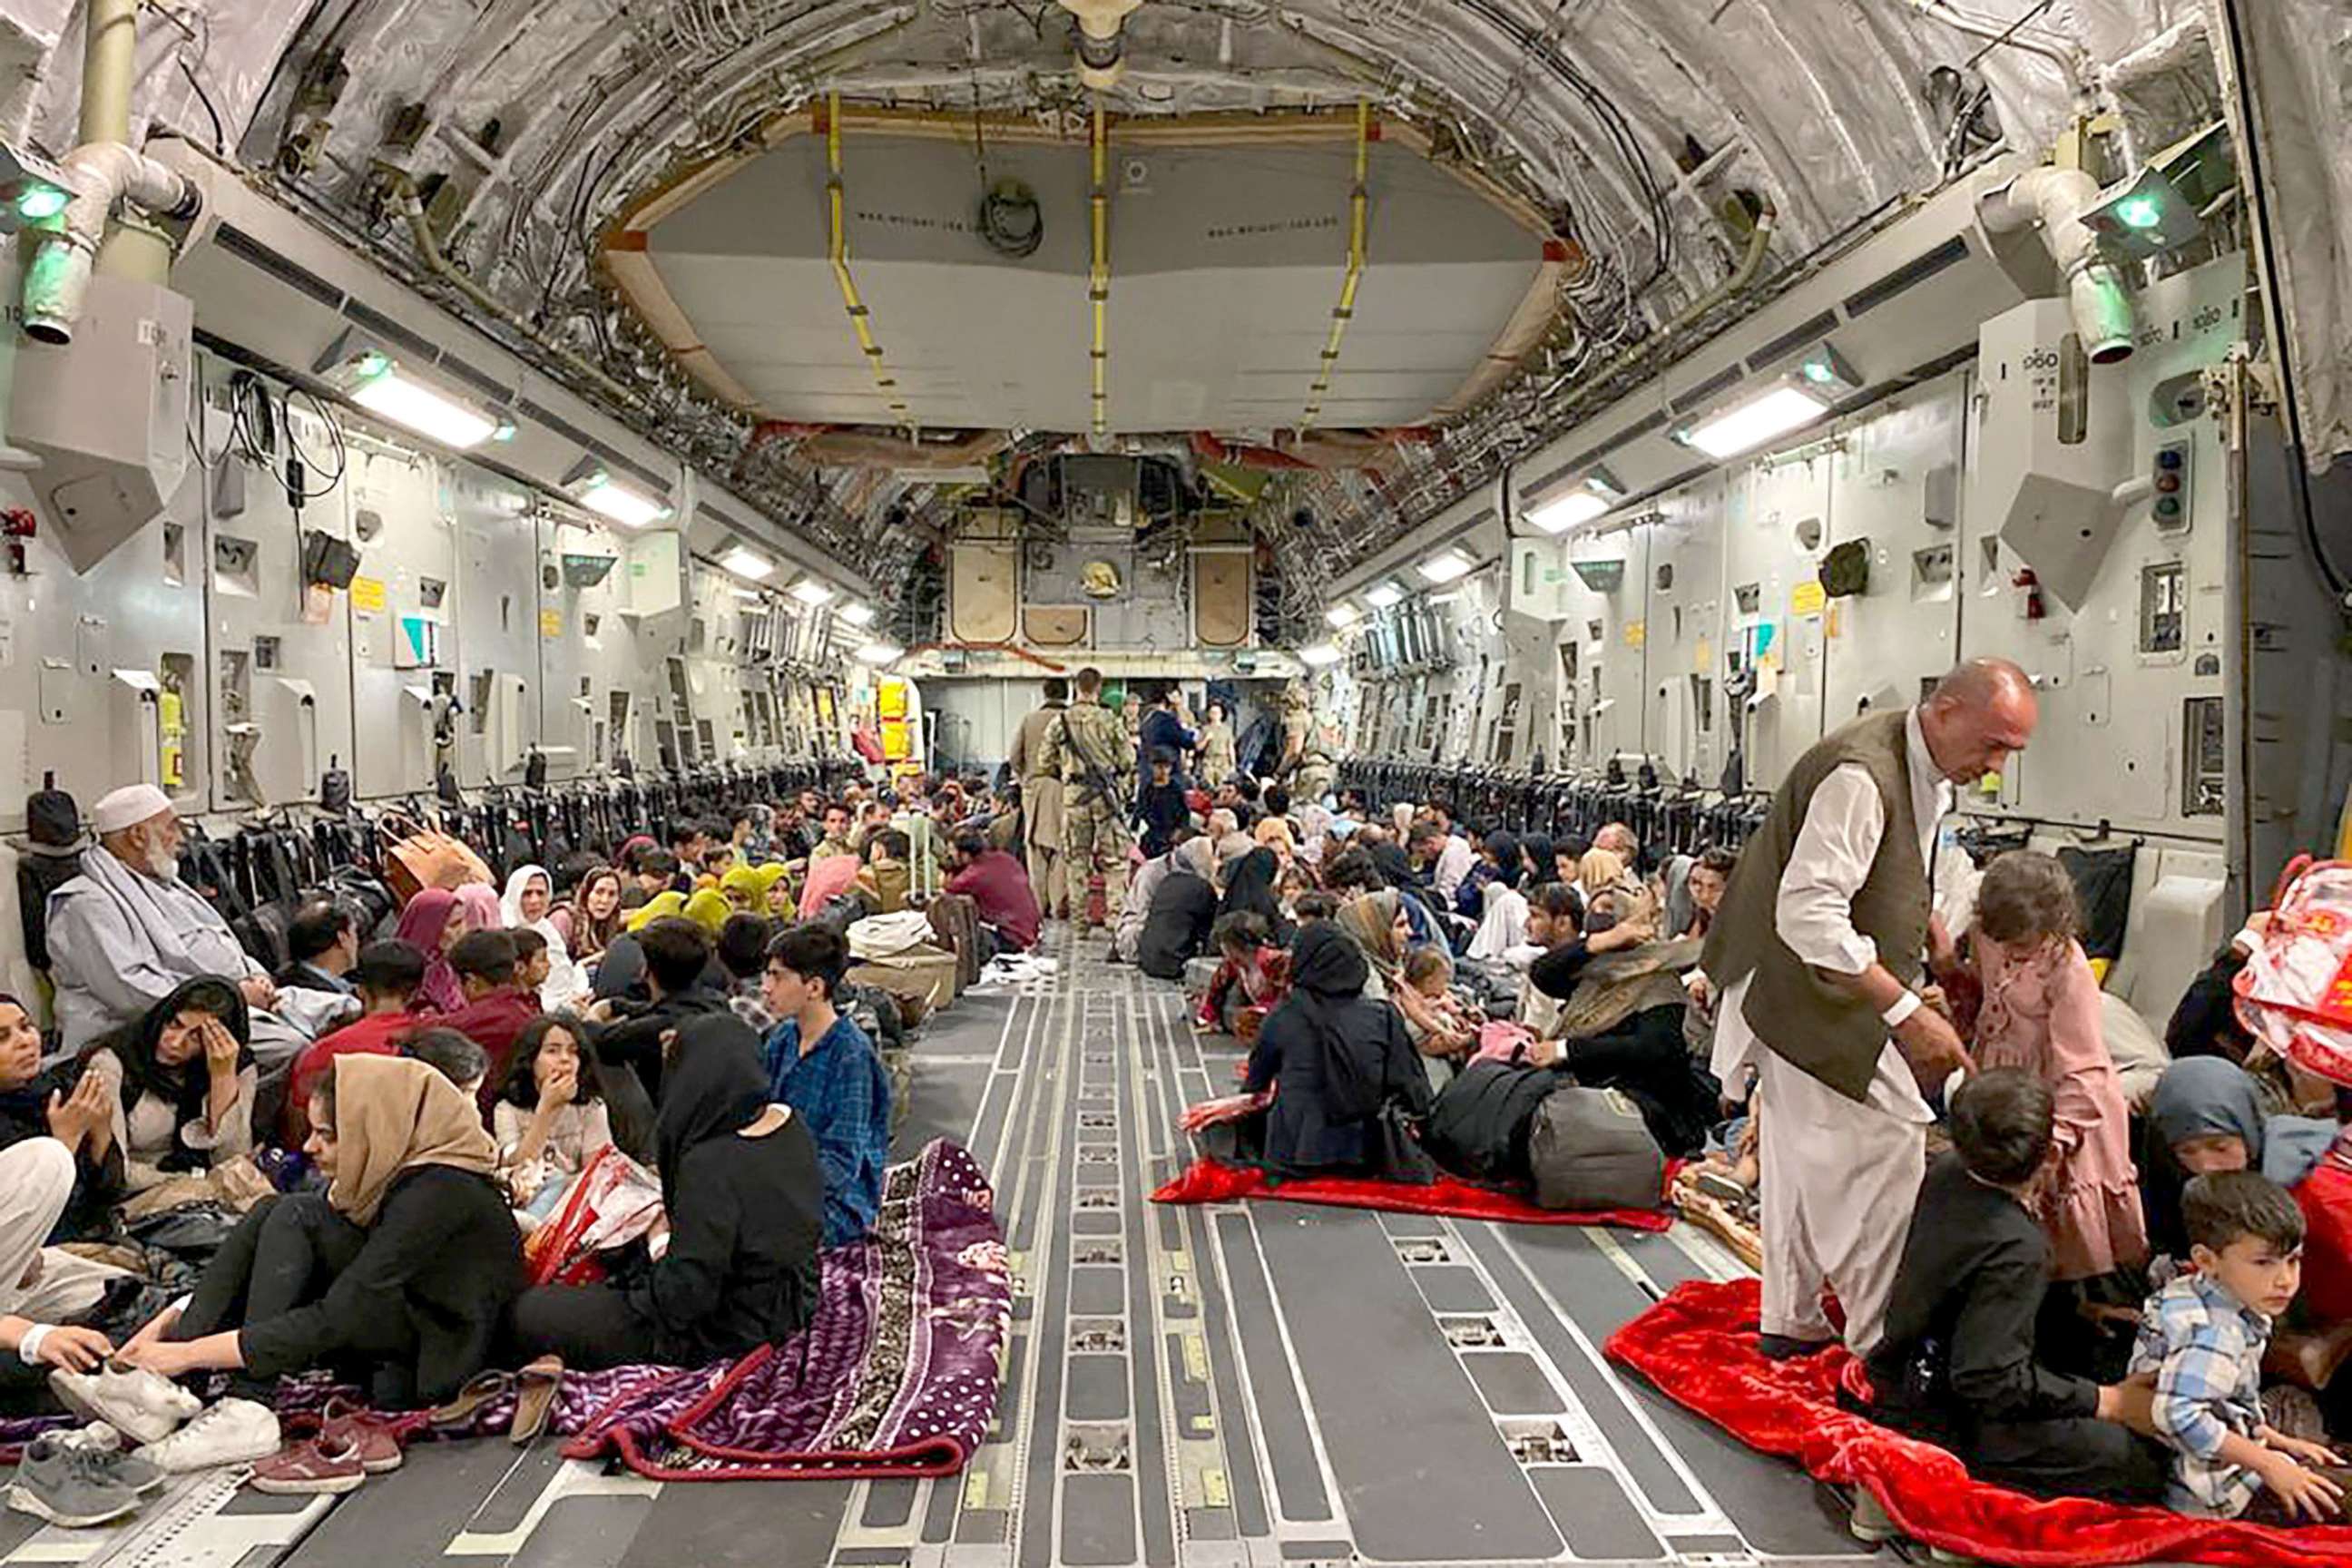 PHOTO: Afghan people sit inside a U.S military aircraft to leave Afghanistan, at the military airport in Kabul on Aug. 19, 2021 after Taliban's military takeover of Afghanistan. 